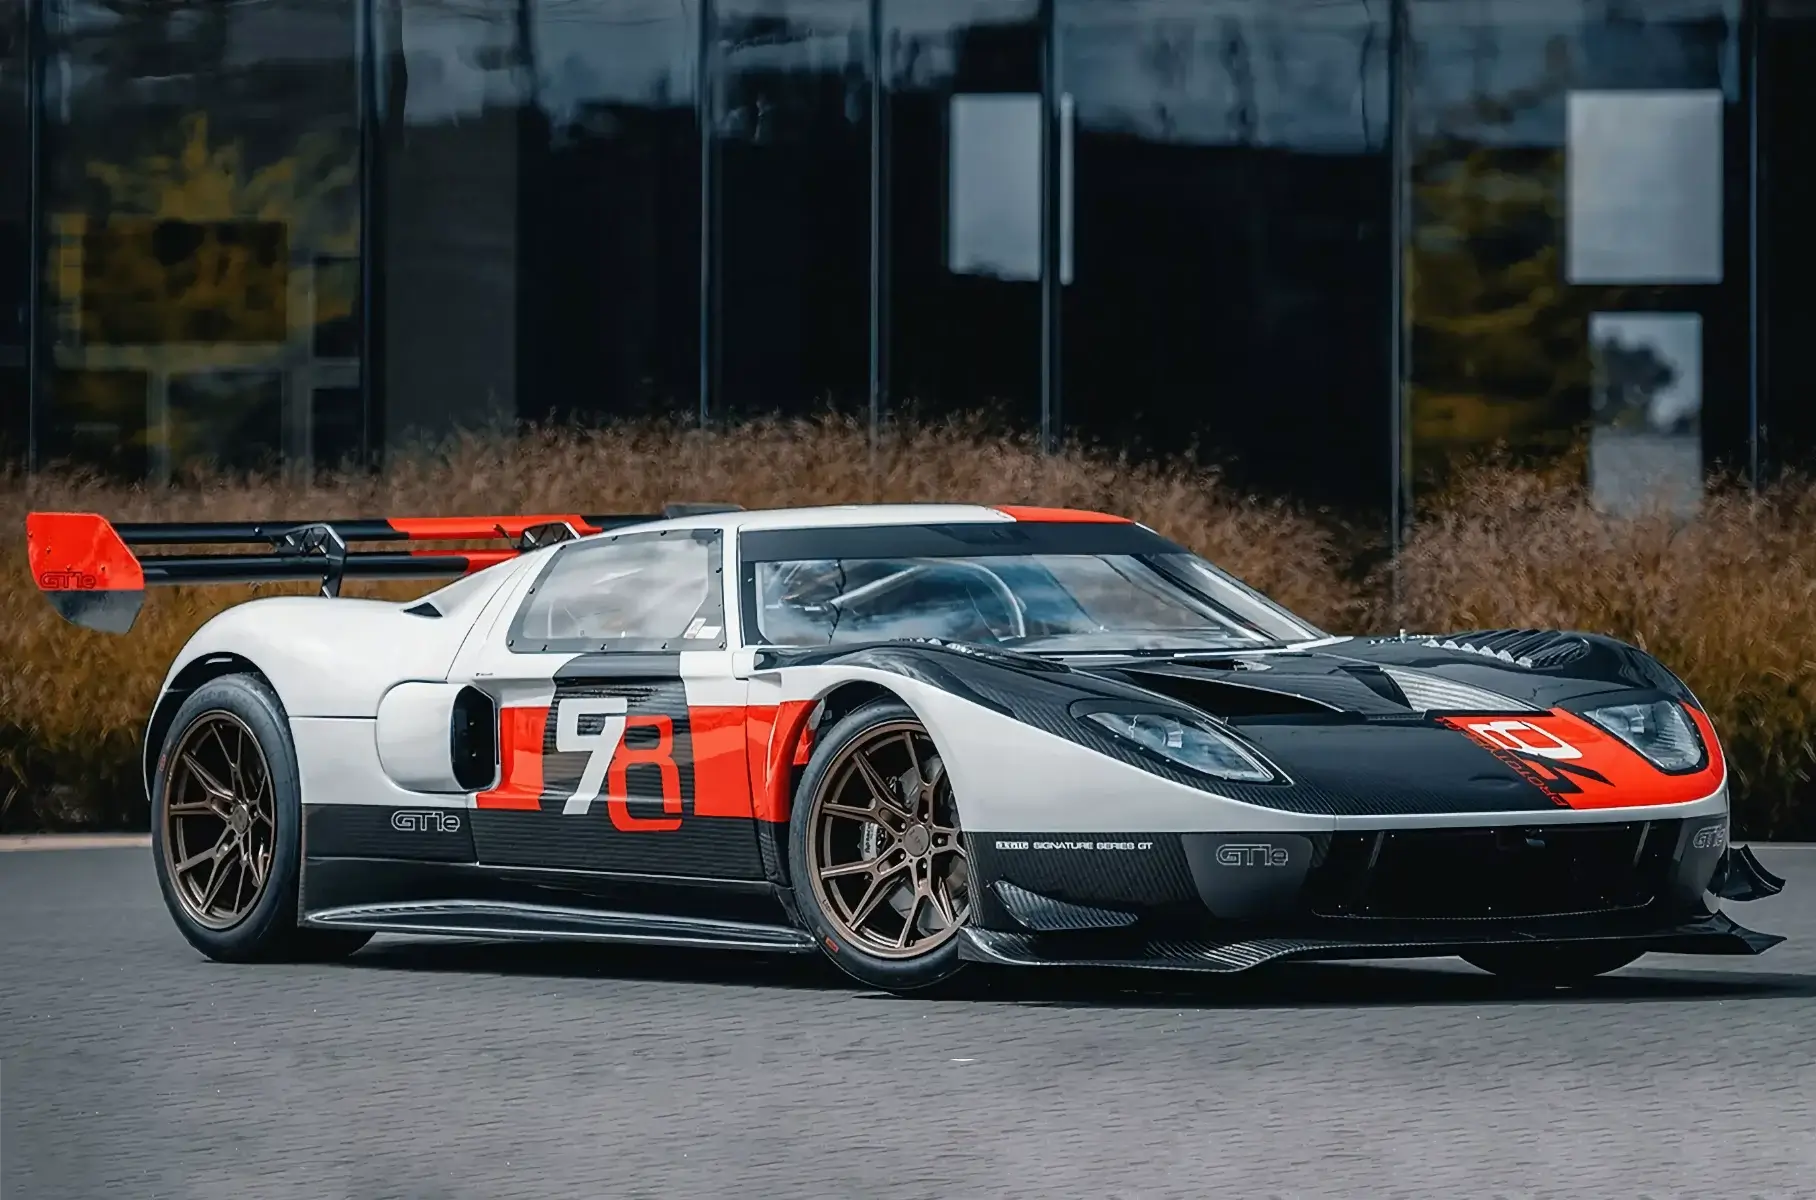 The American company will release electric versions of the Ford GT and DeLorean DMC-12